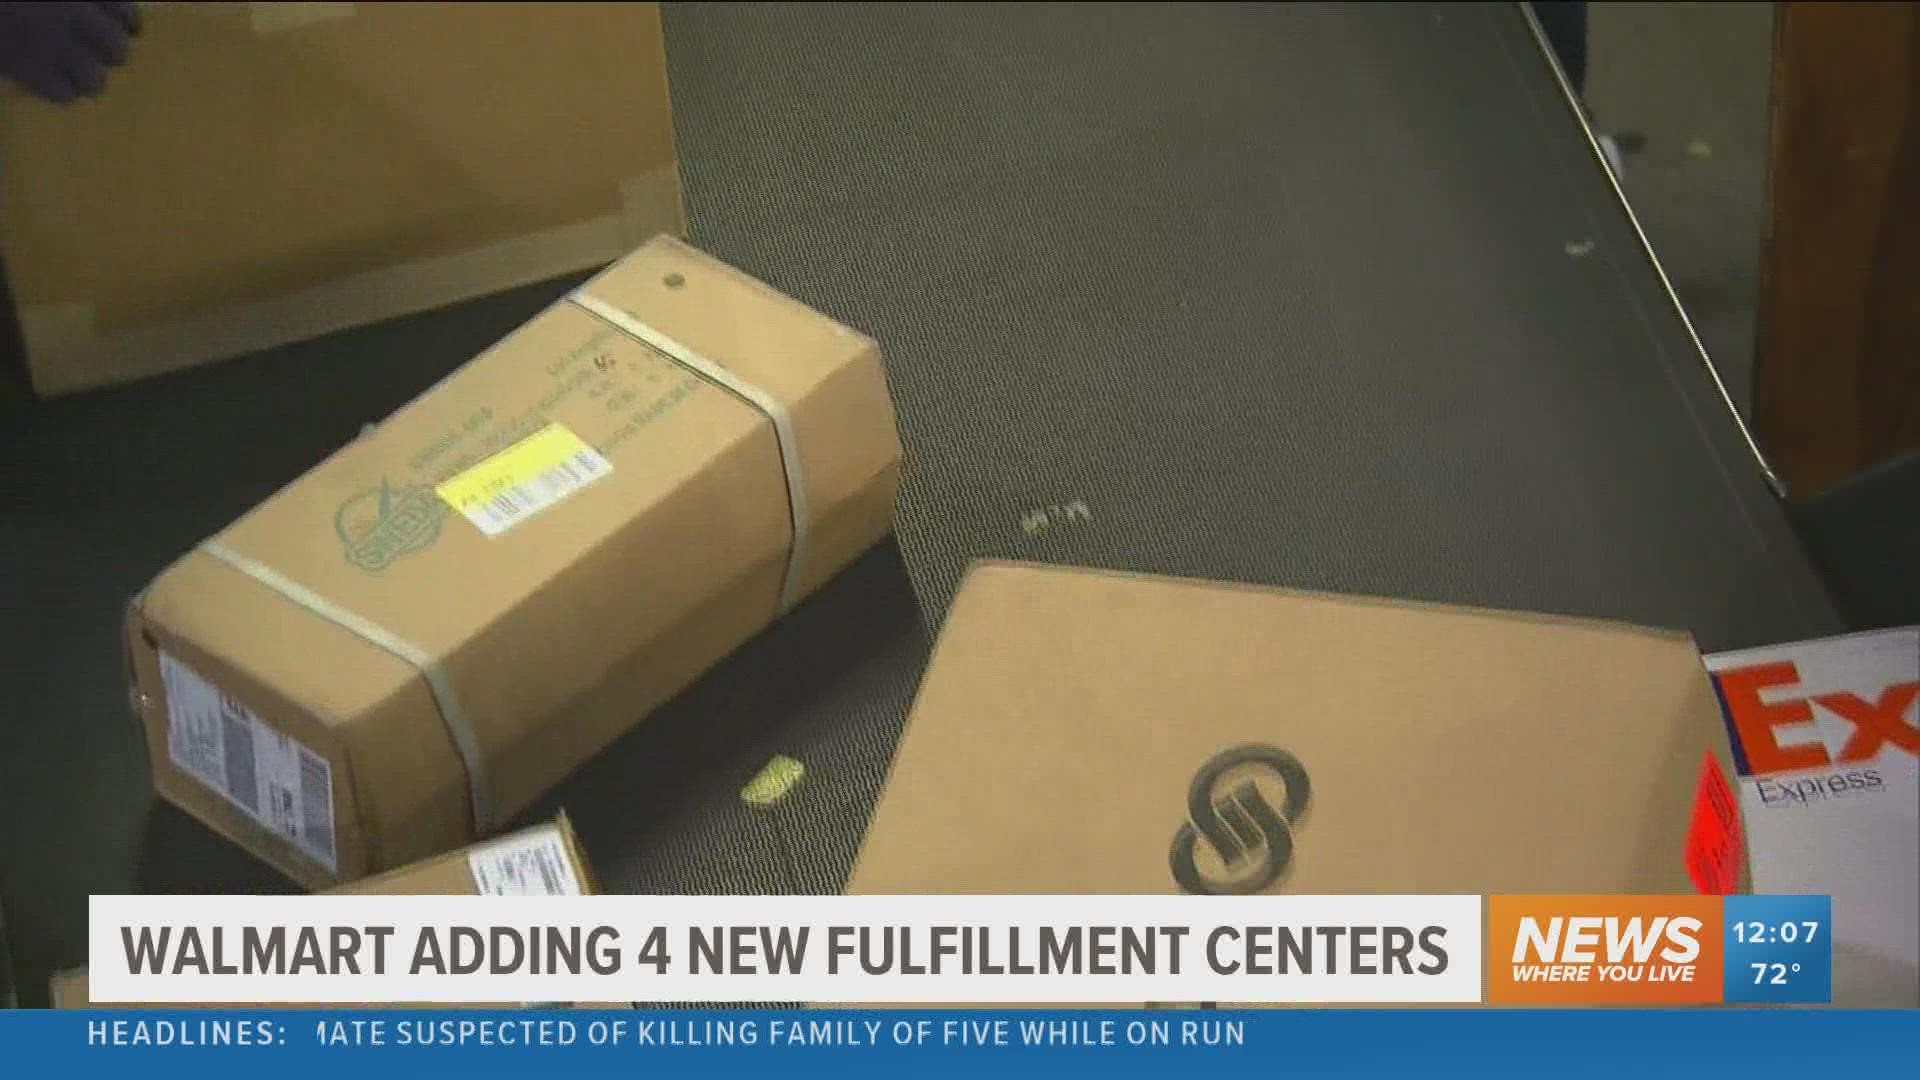 Walmart said that its four next generation fulfillment centers will be built over the next three years.